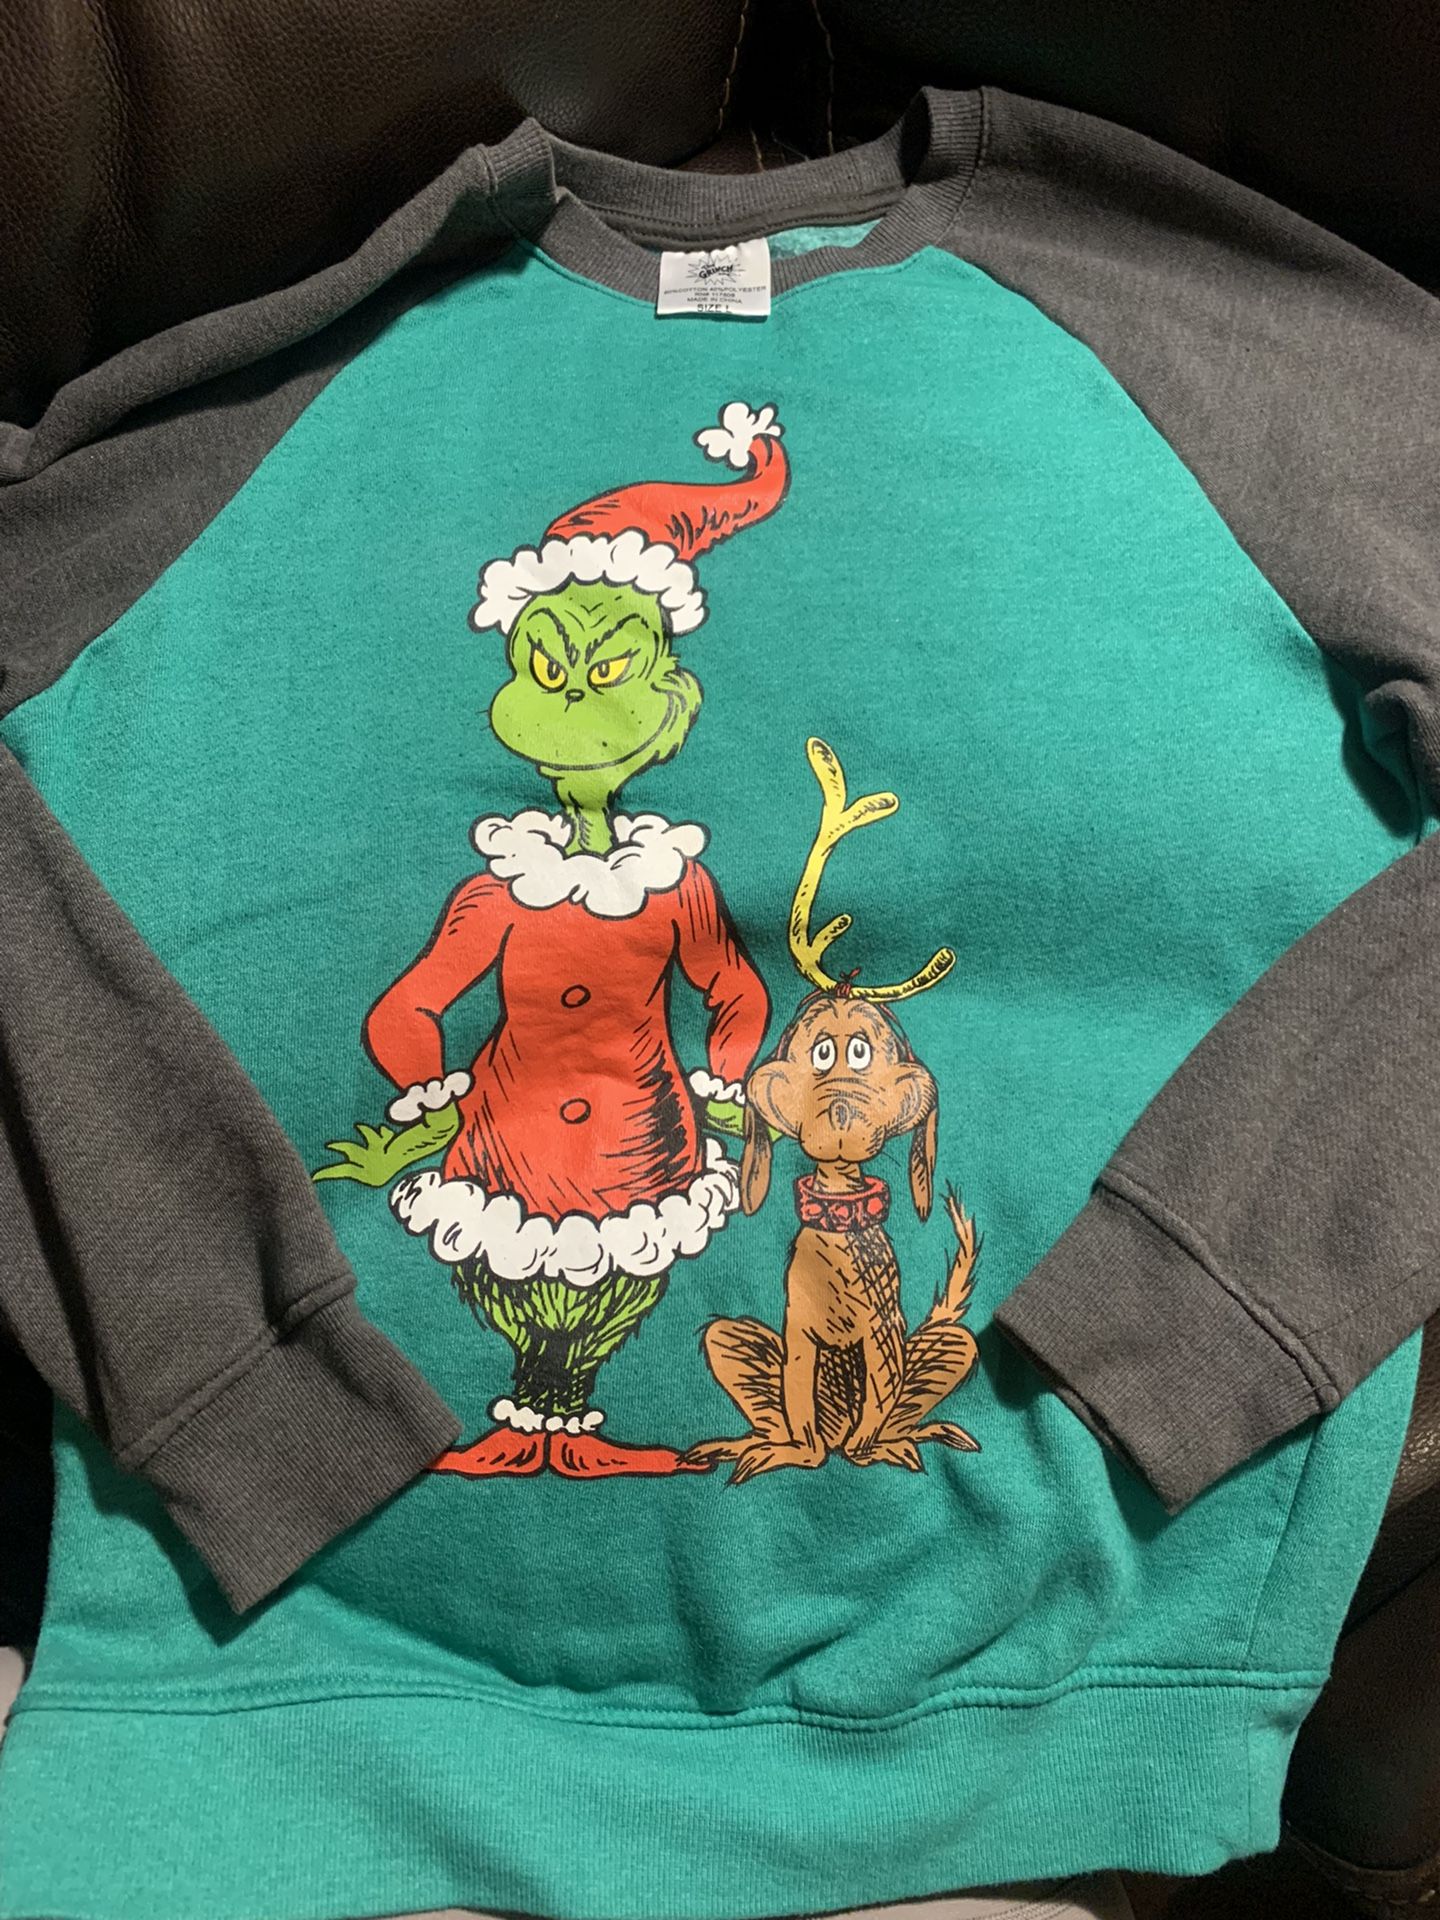 Grinch Christmas Ugly Sweater (Check Out All My Other Christmas Items For Sale!)